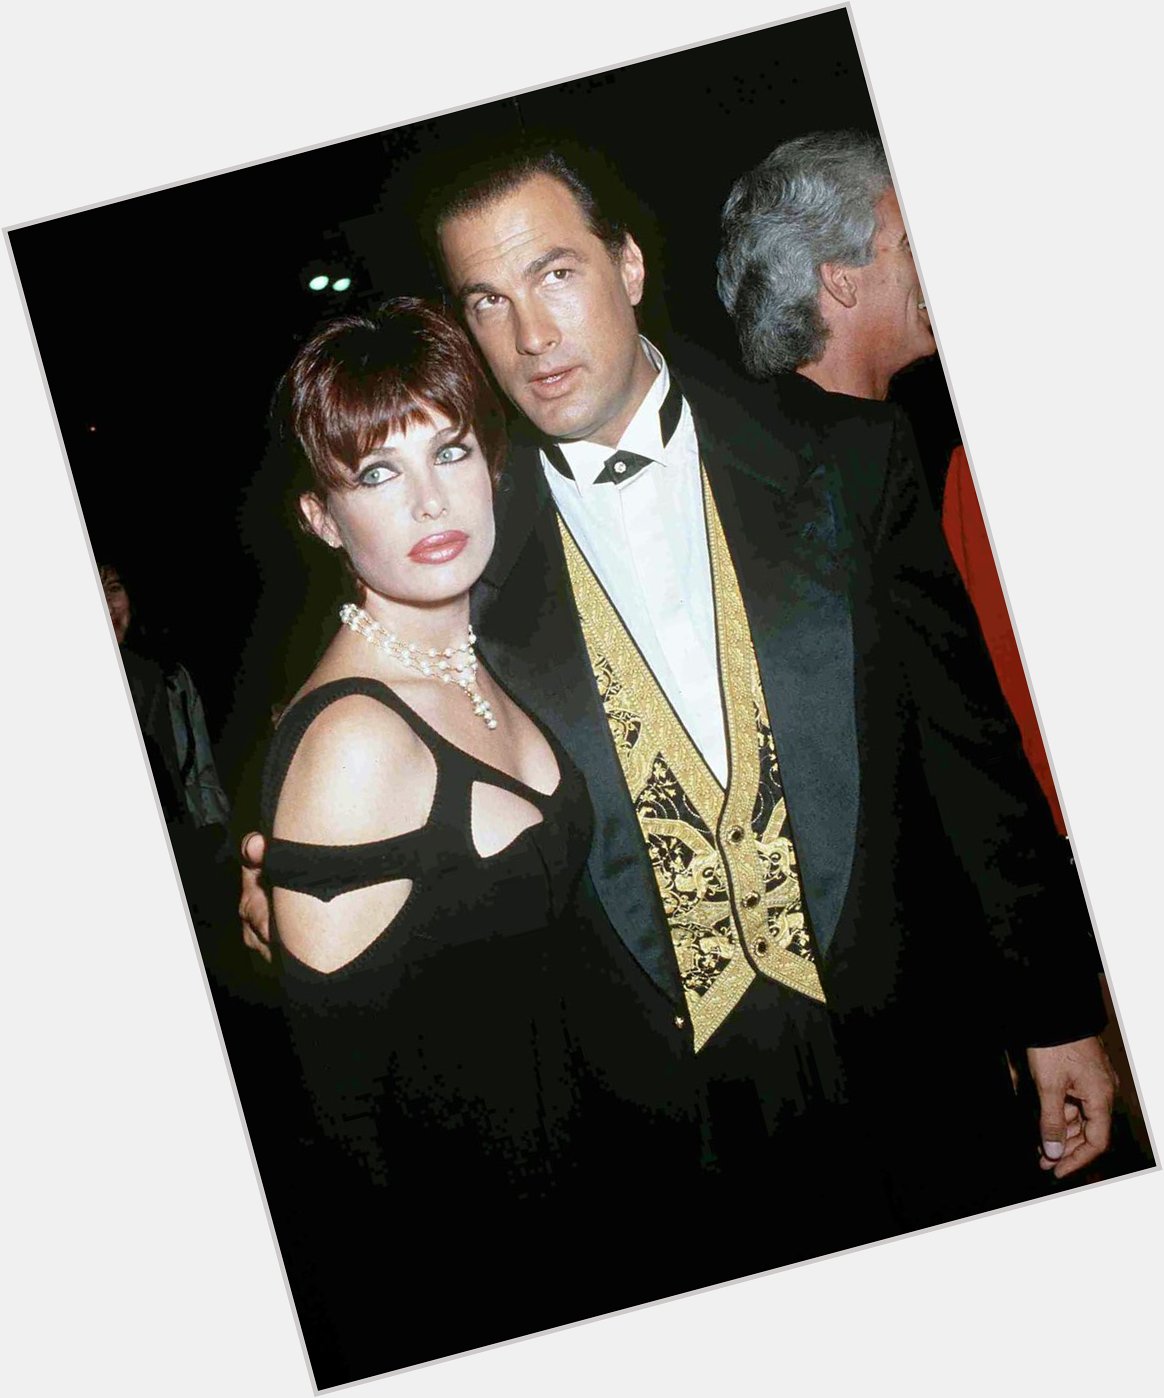 Happy 66th birthday to Steven Seagal, seen here w/ Kelly LeBrock attending the premiere of \Under Siege\ (1992). 